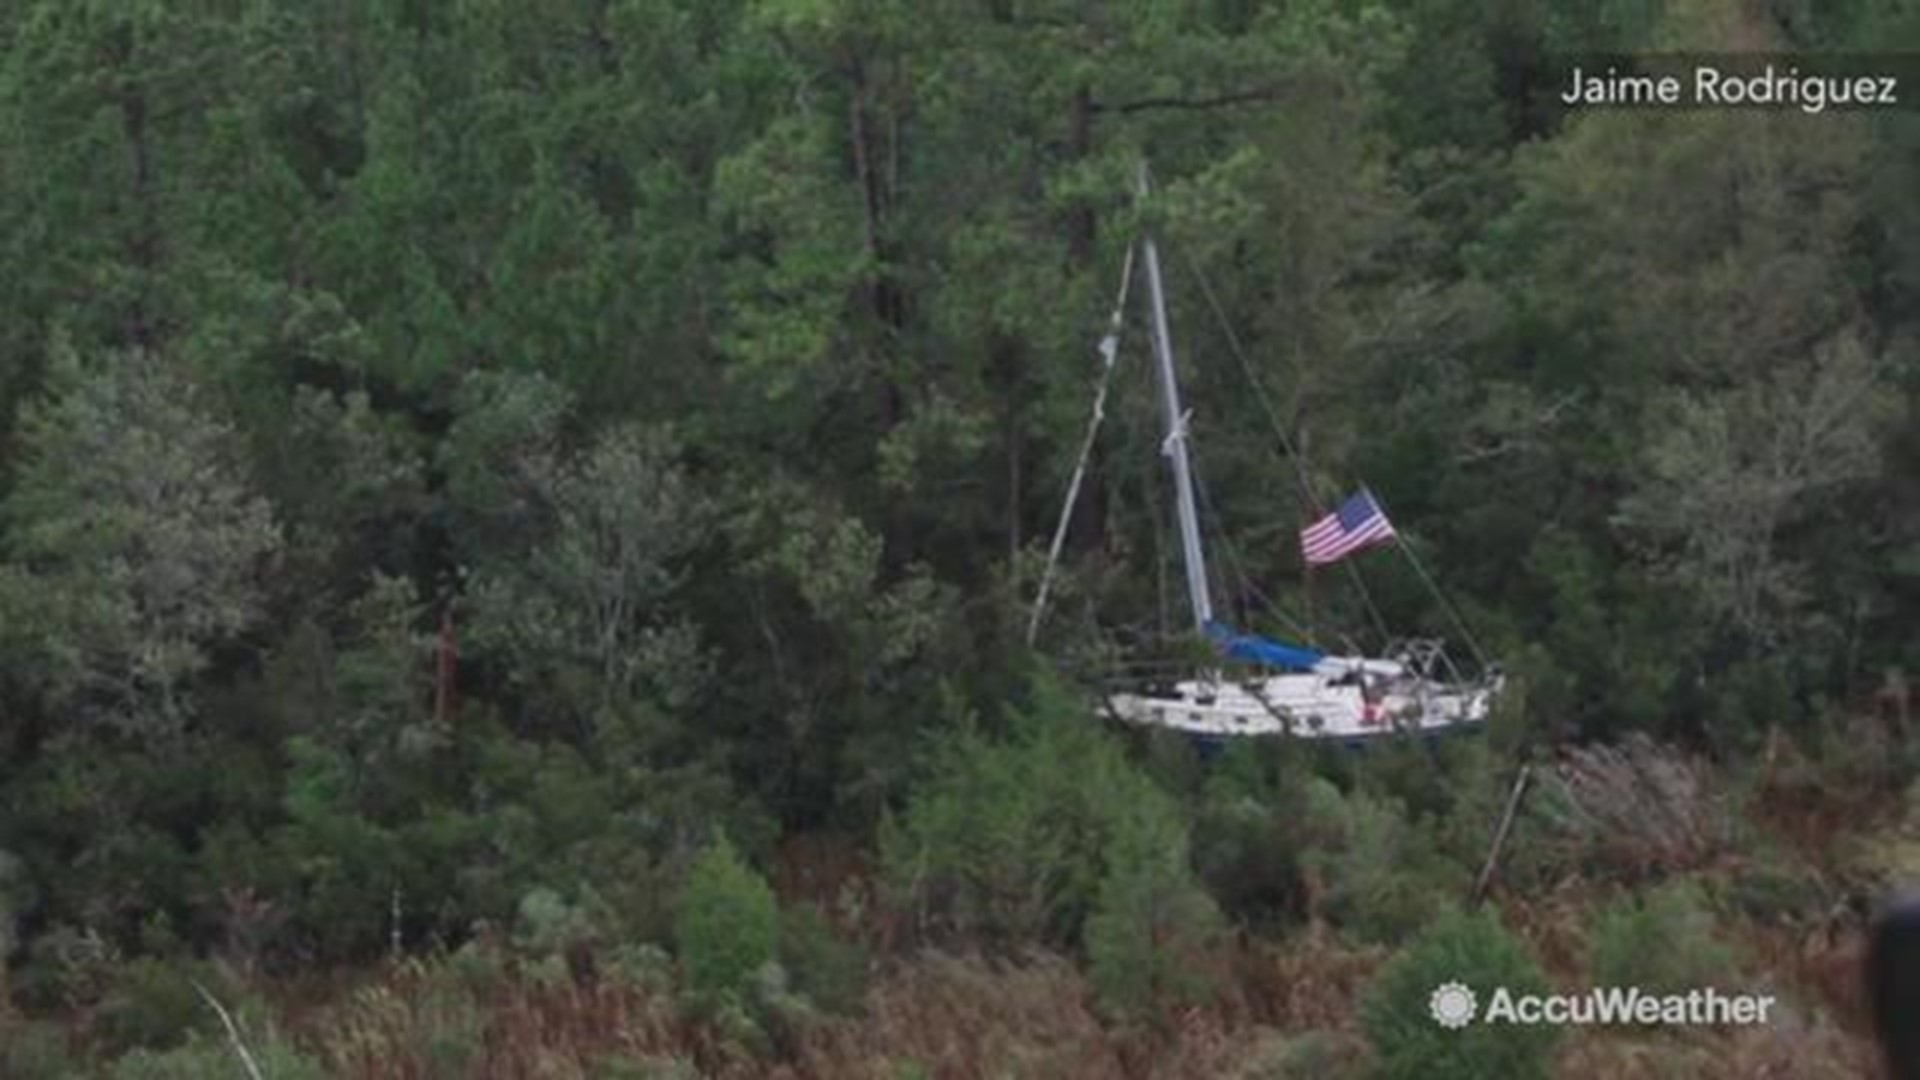 A helicopter survey conducted by US Customs and Border Protection on September 16 shows this boat washed into a wooded area from Hurricane Florence in Raleigh, NC.